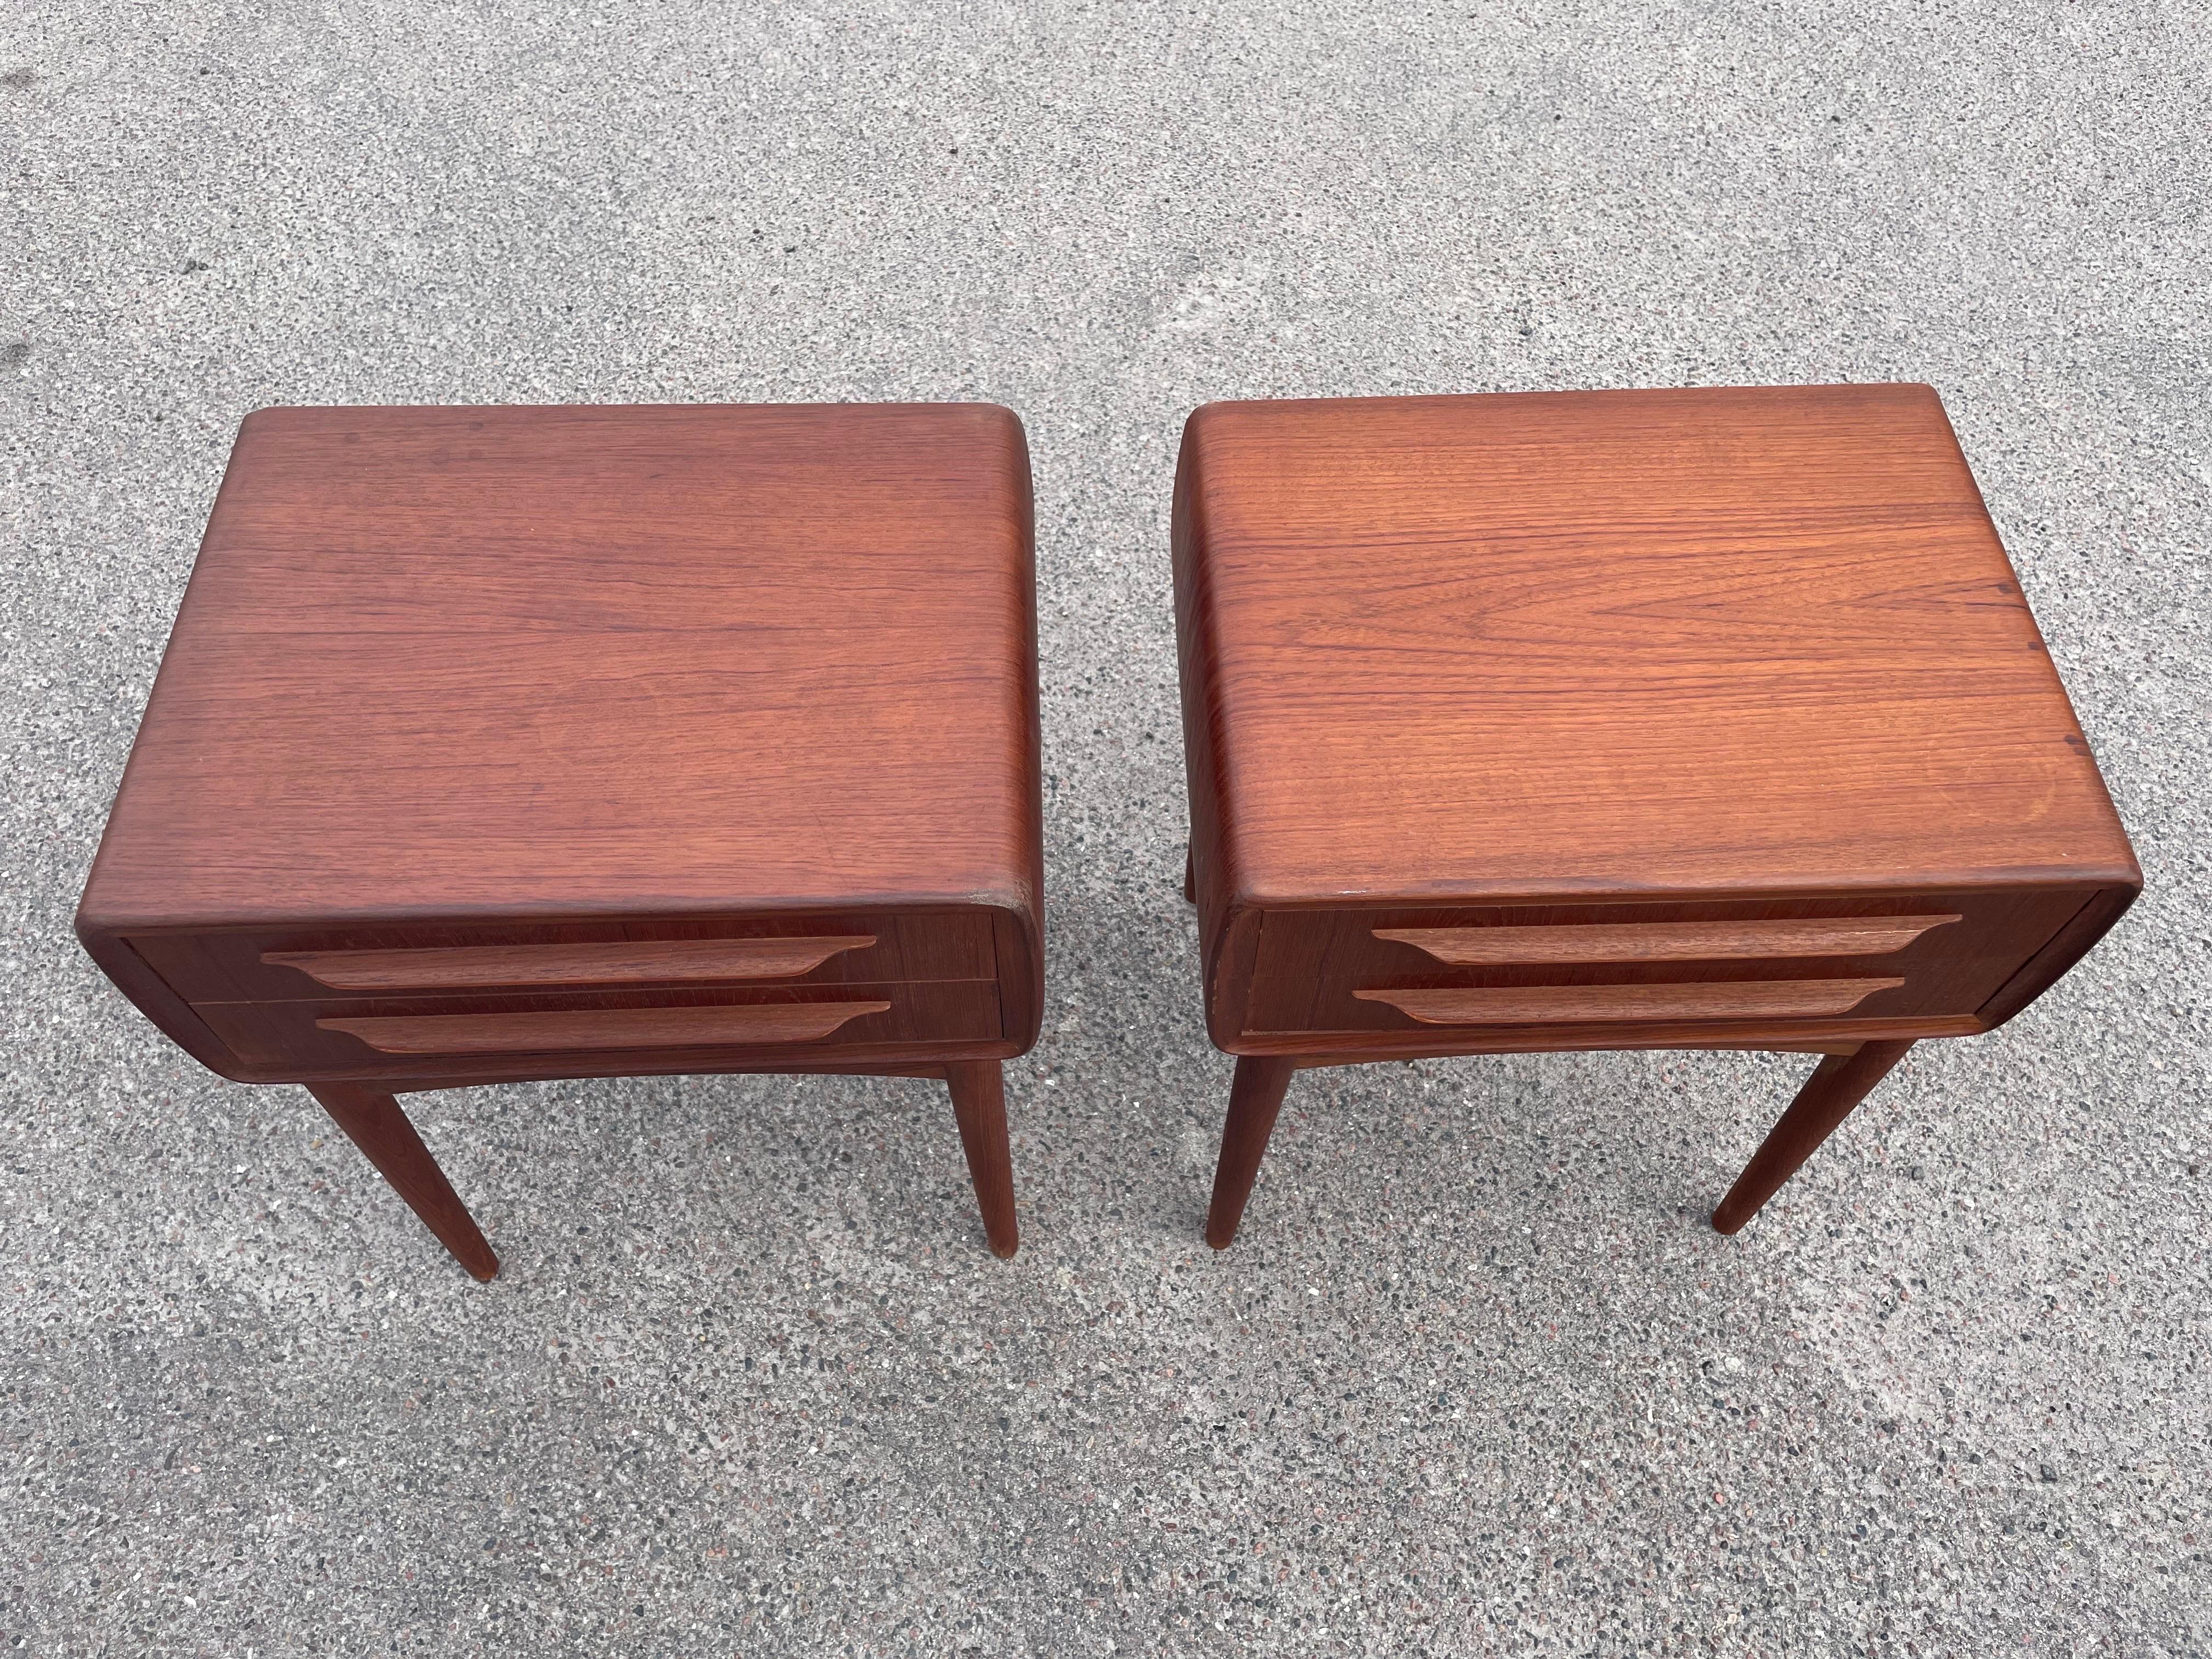 Introducing the pinnacle of Danish Mid-Century Modern design - a rare and coveted pair of nightstands in teak that stands out from the rest. Designed by Johannes Andersen and made by CFC furniture in Denmark during the 1960s, these nightstands are a